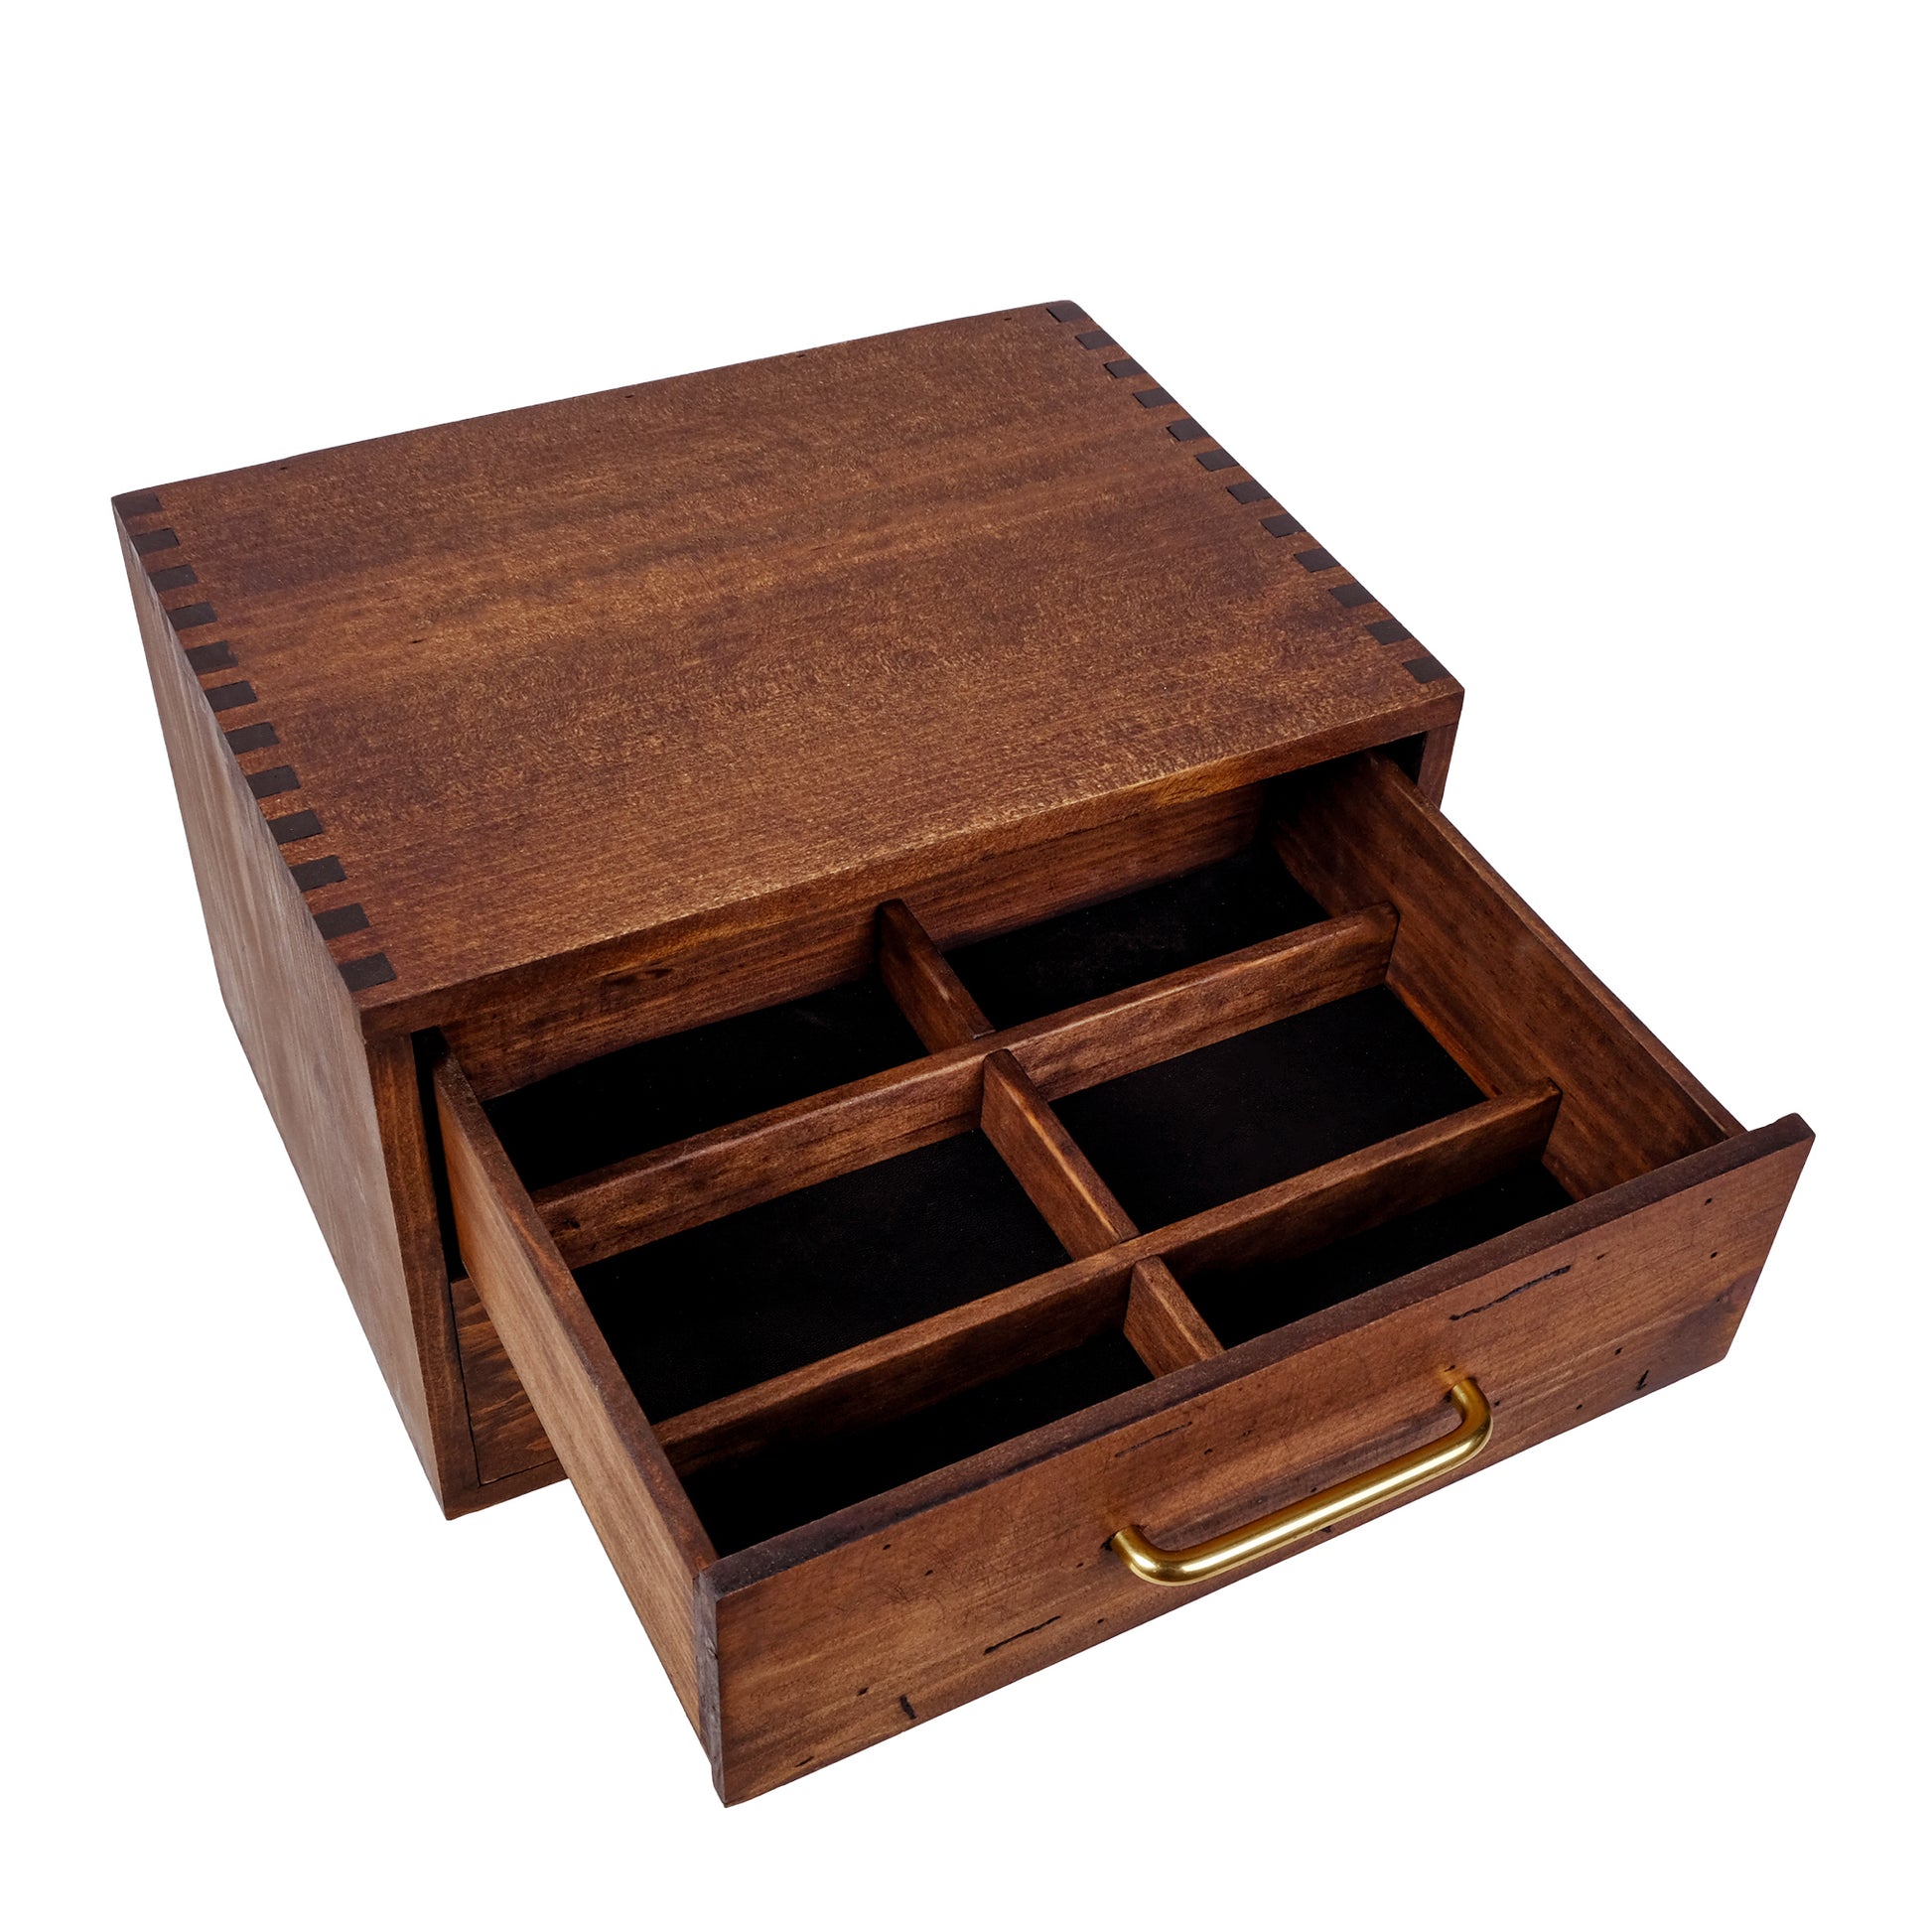 Women's Jewelry Box Organizer made with solid wood.